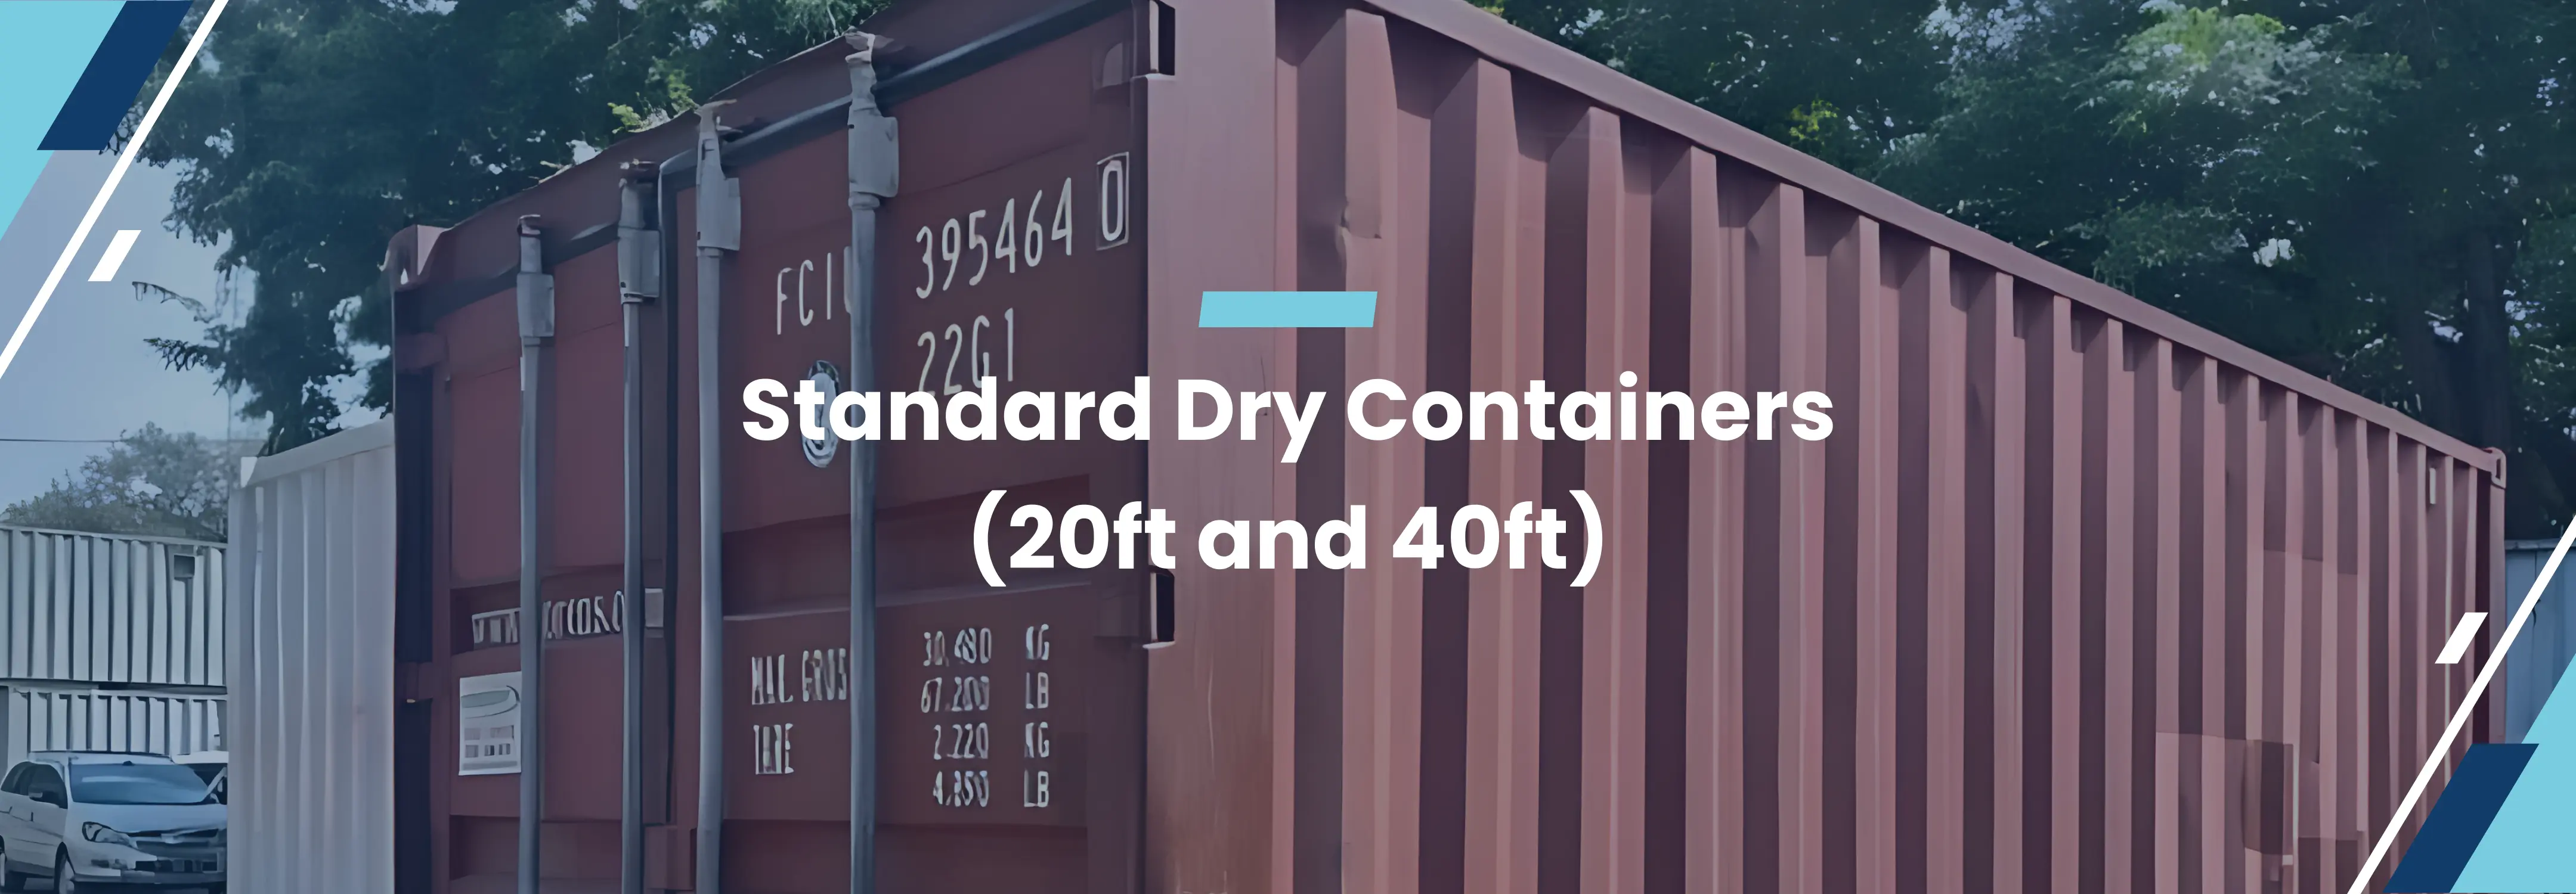 Banner of Standard Dry Containers